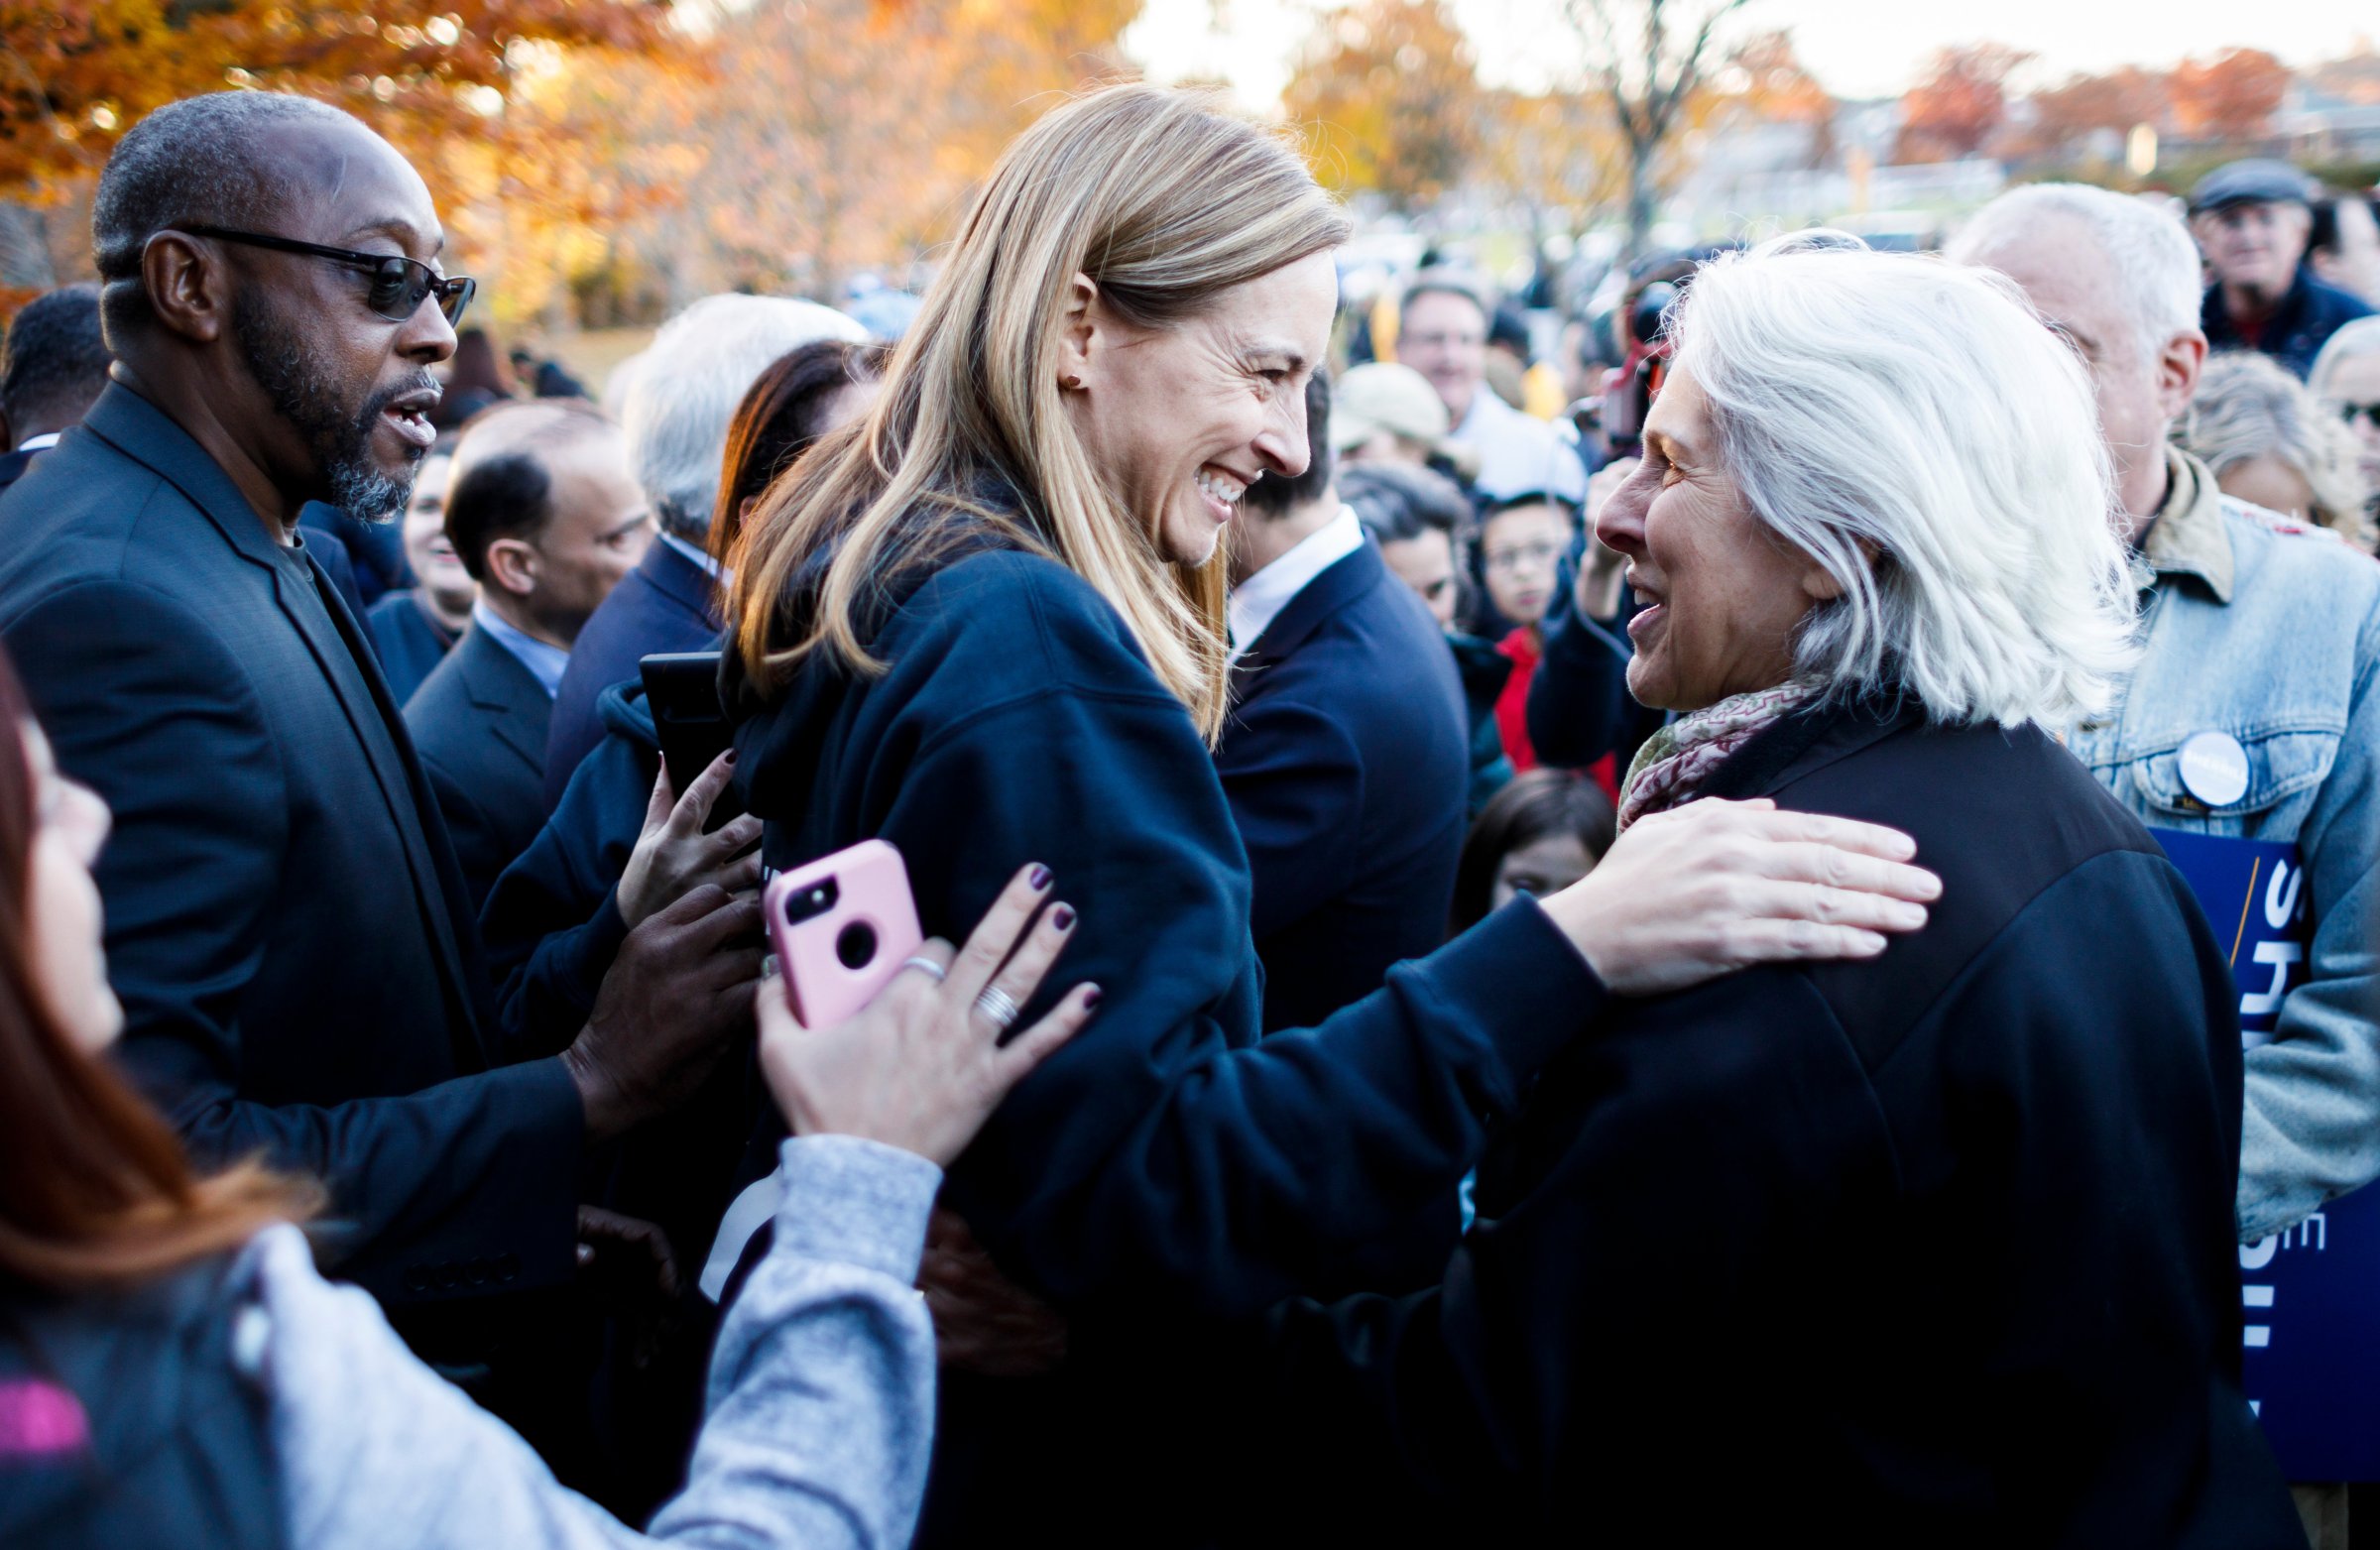 Democratic congressional candidate Mikie Sherrill campaigns in New Jersey, Livingston, USA - 04 Nov 2018